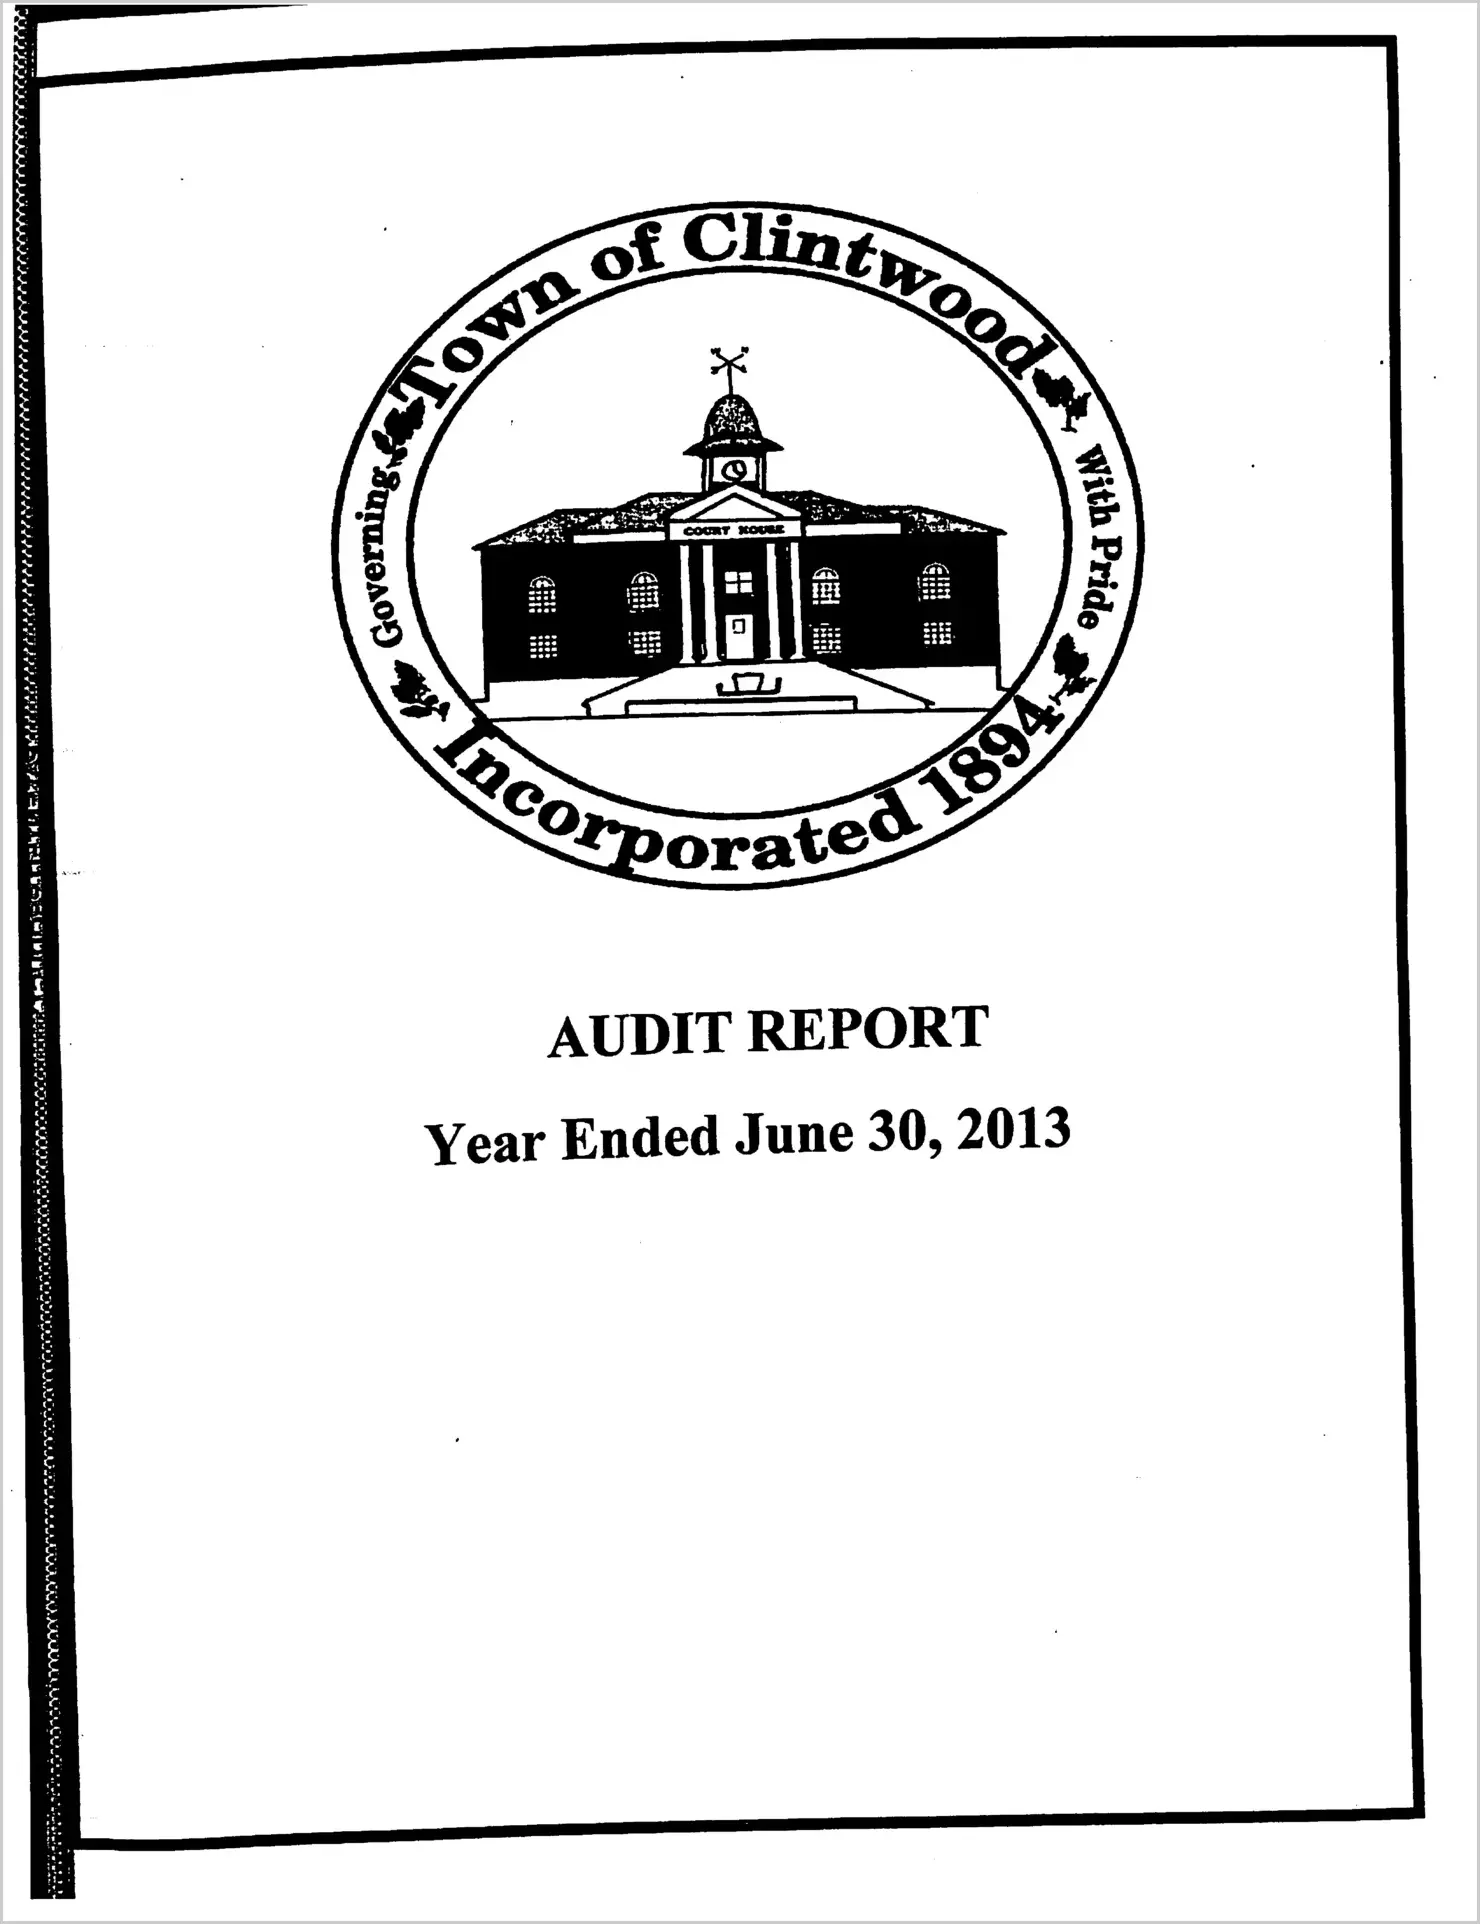 2013 Annual Financial Report for Town of Clintwood